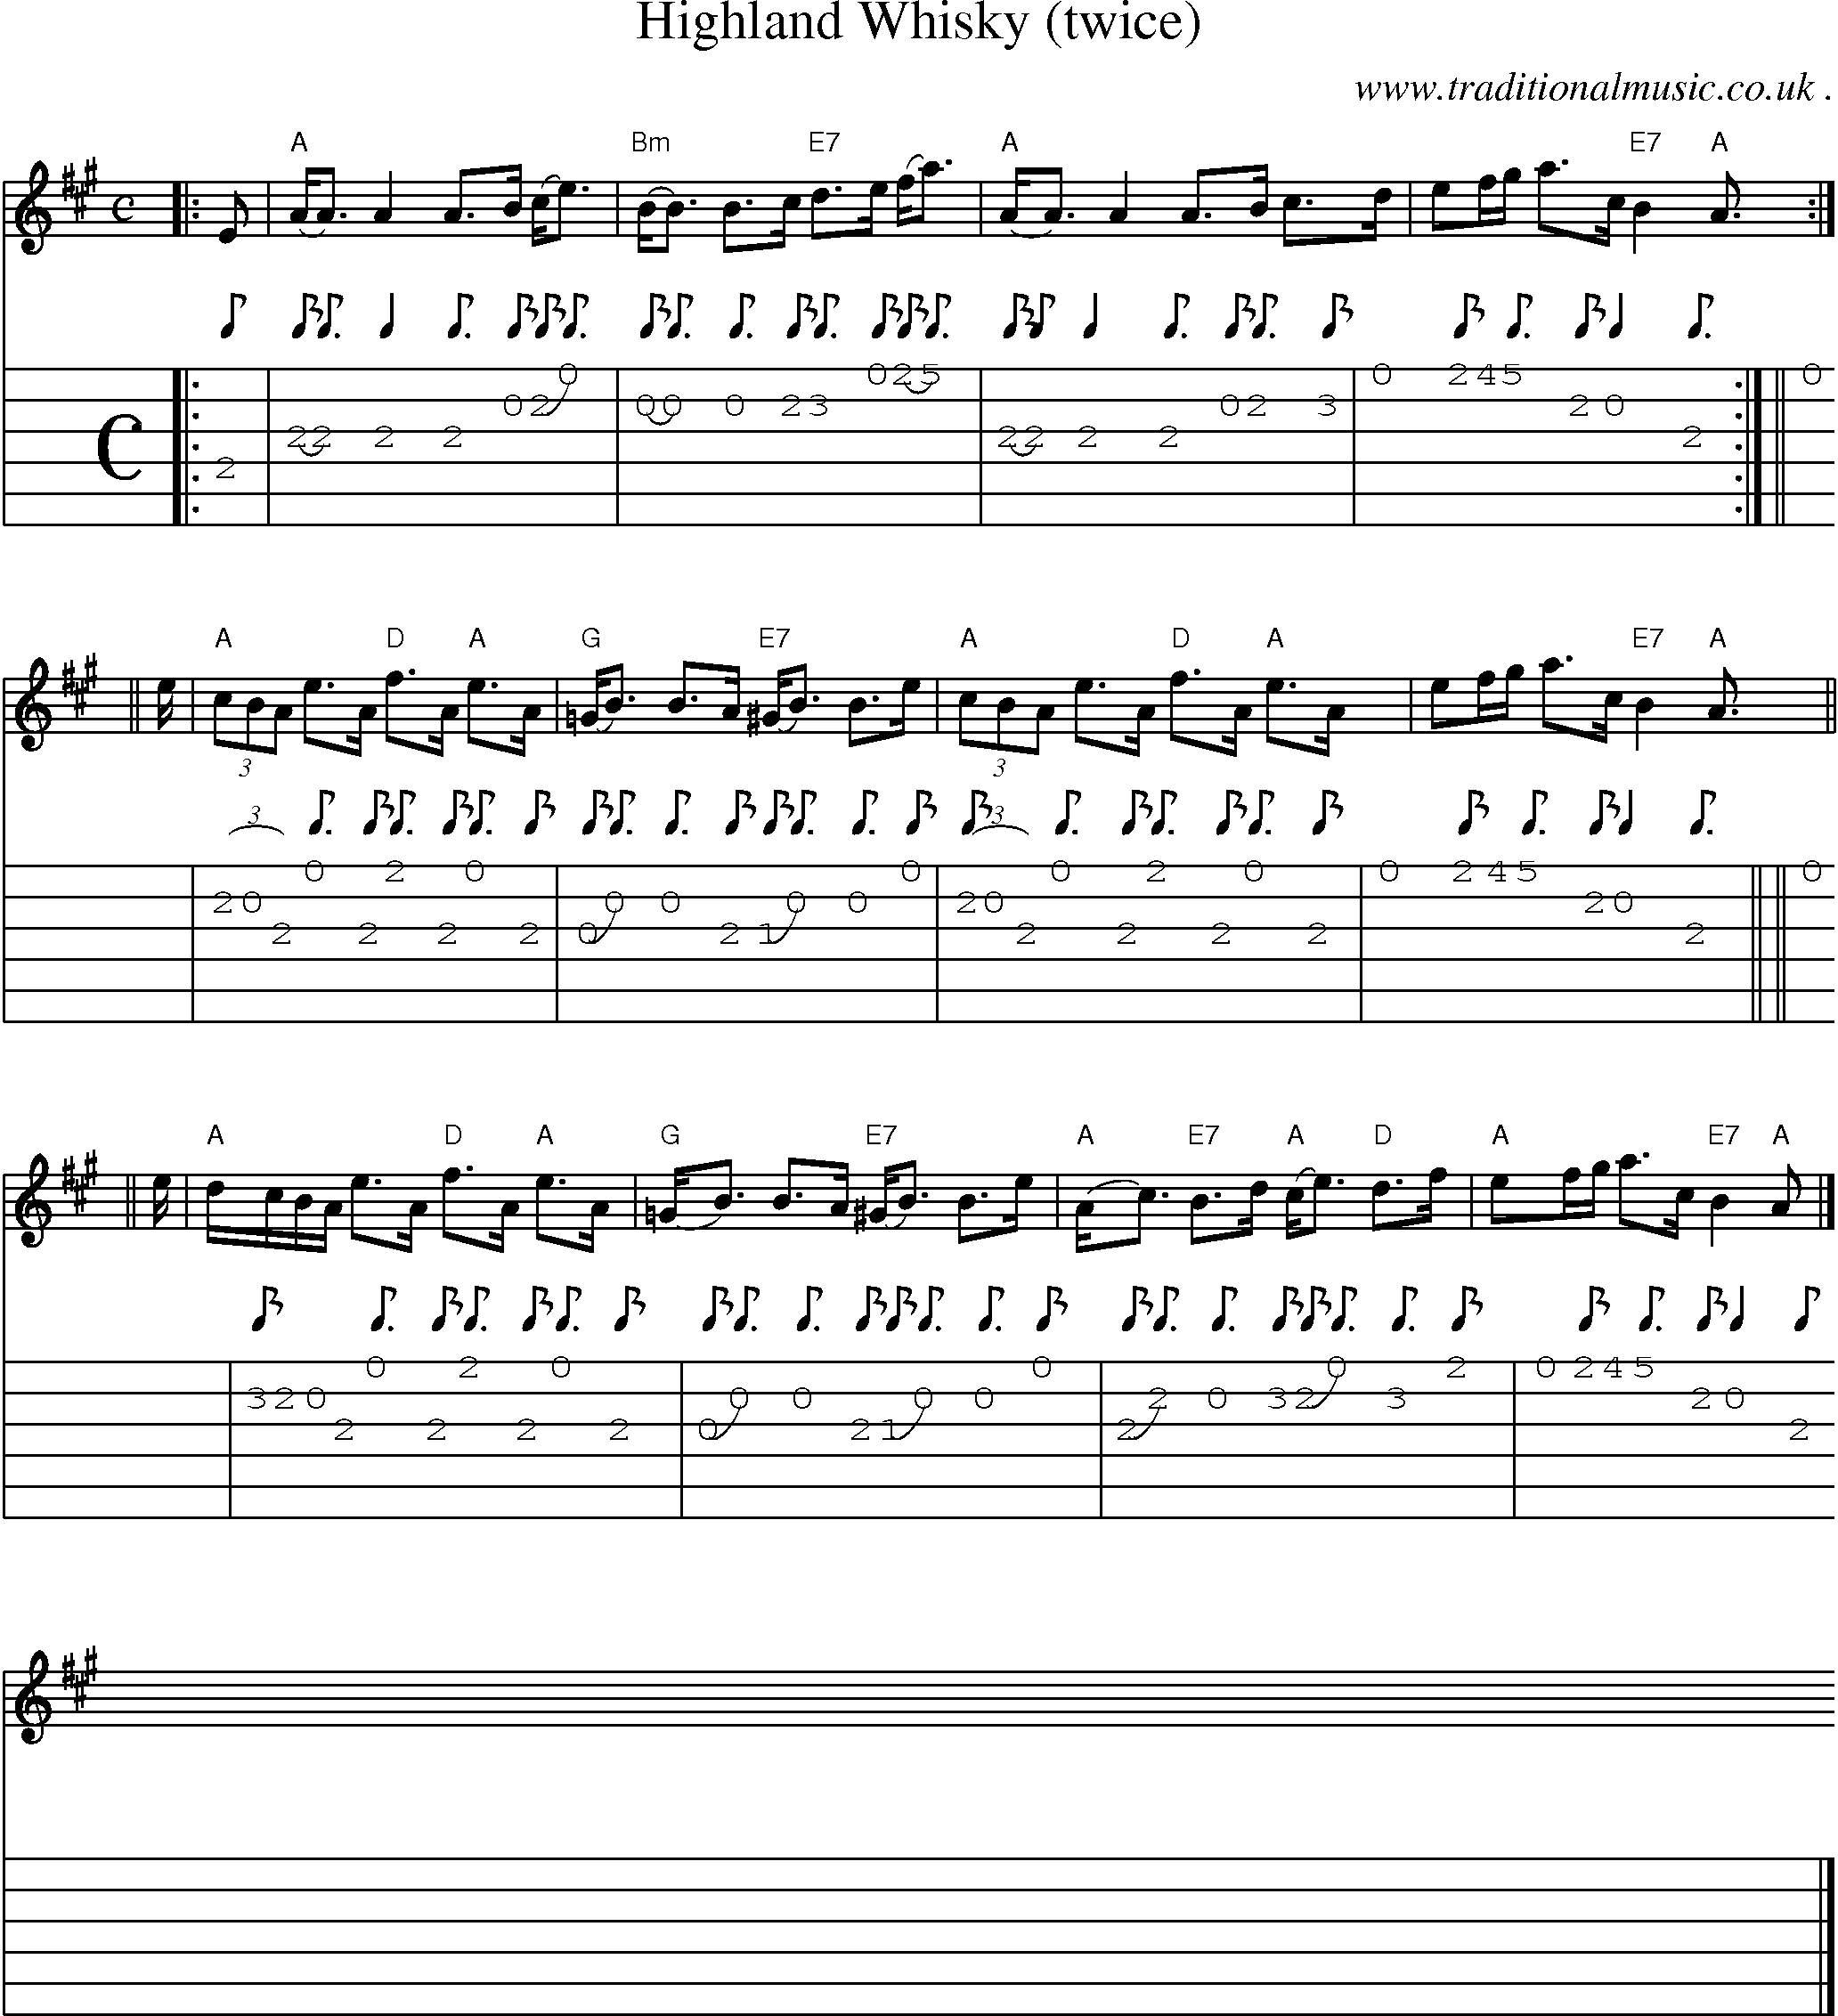 Sheet-music  score, Chords and Guitar Tabs for Highland Whisky Twice